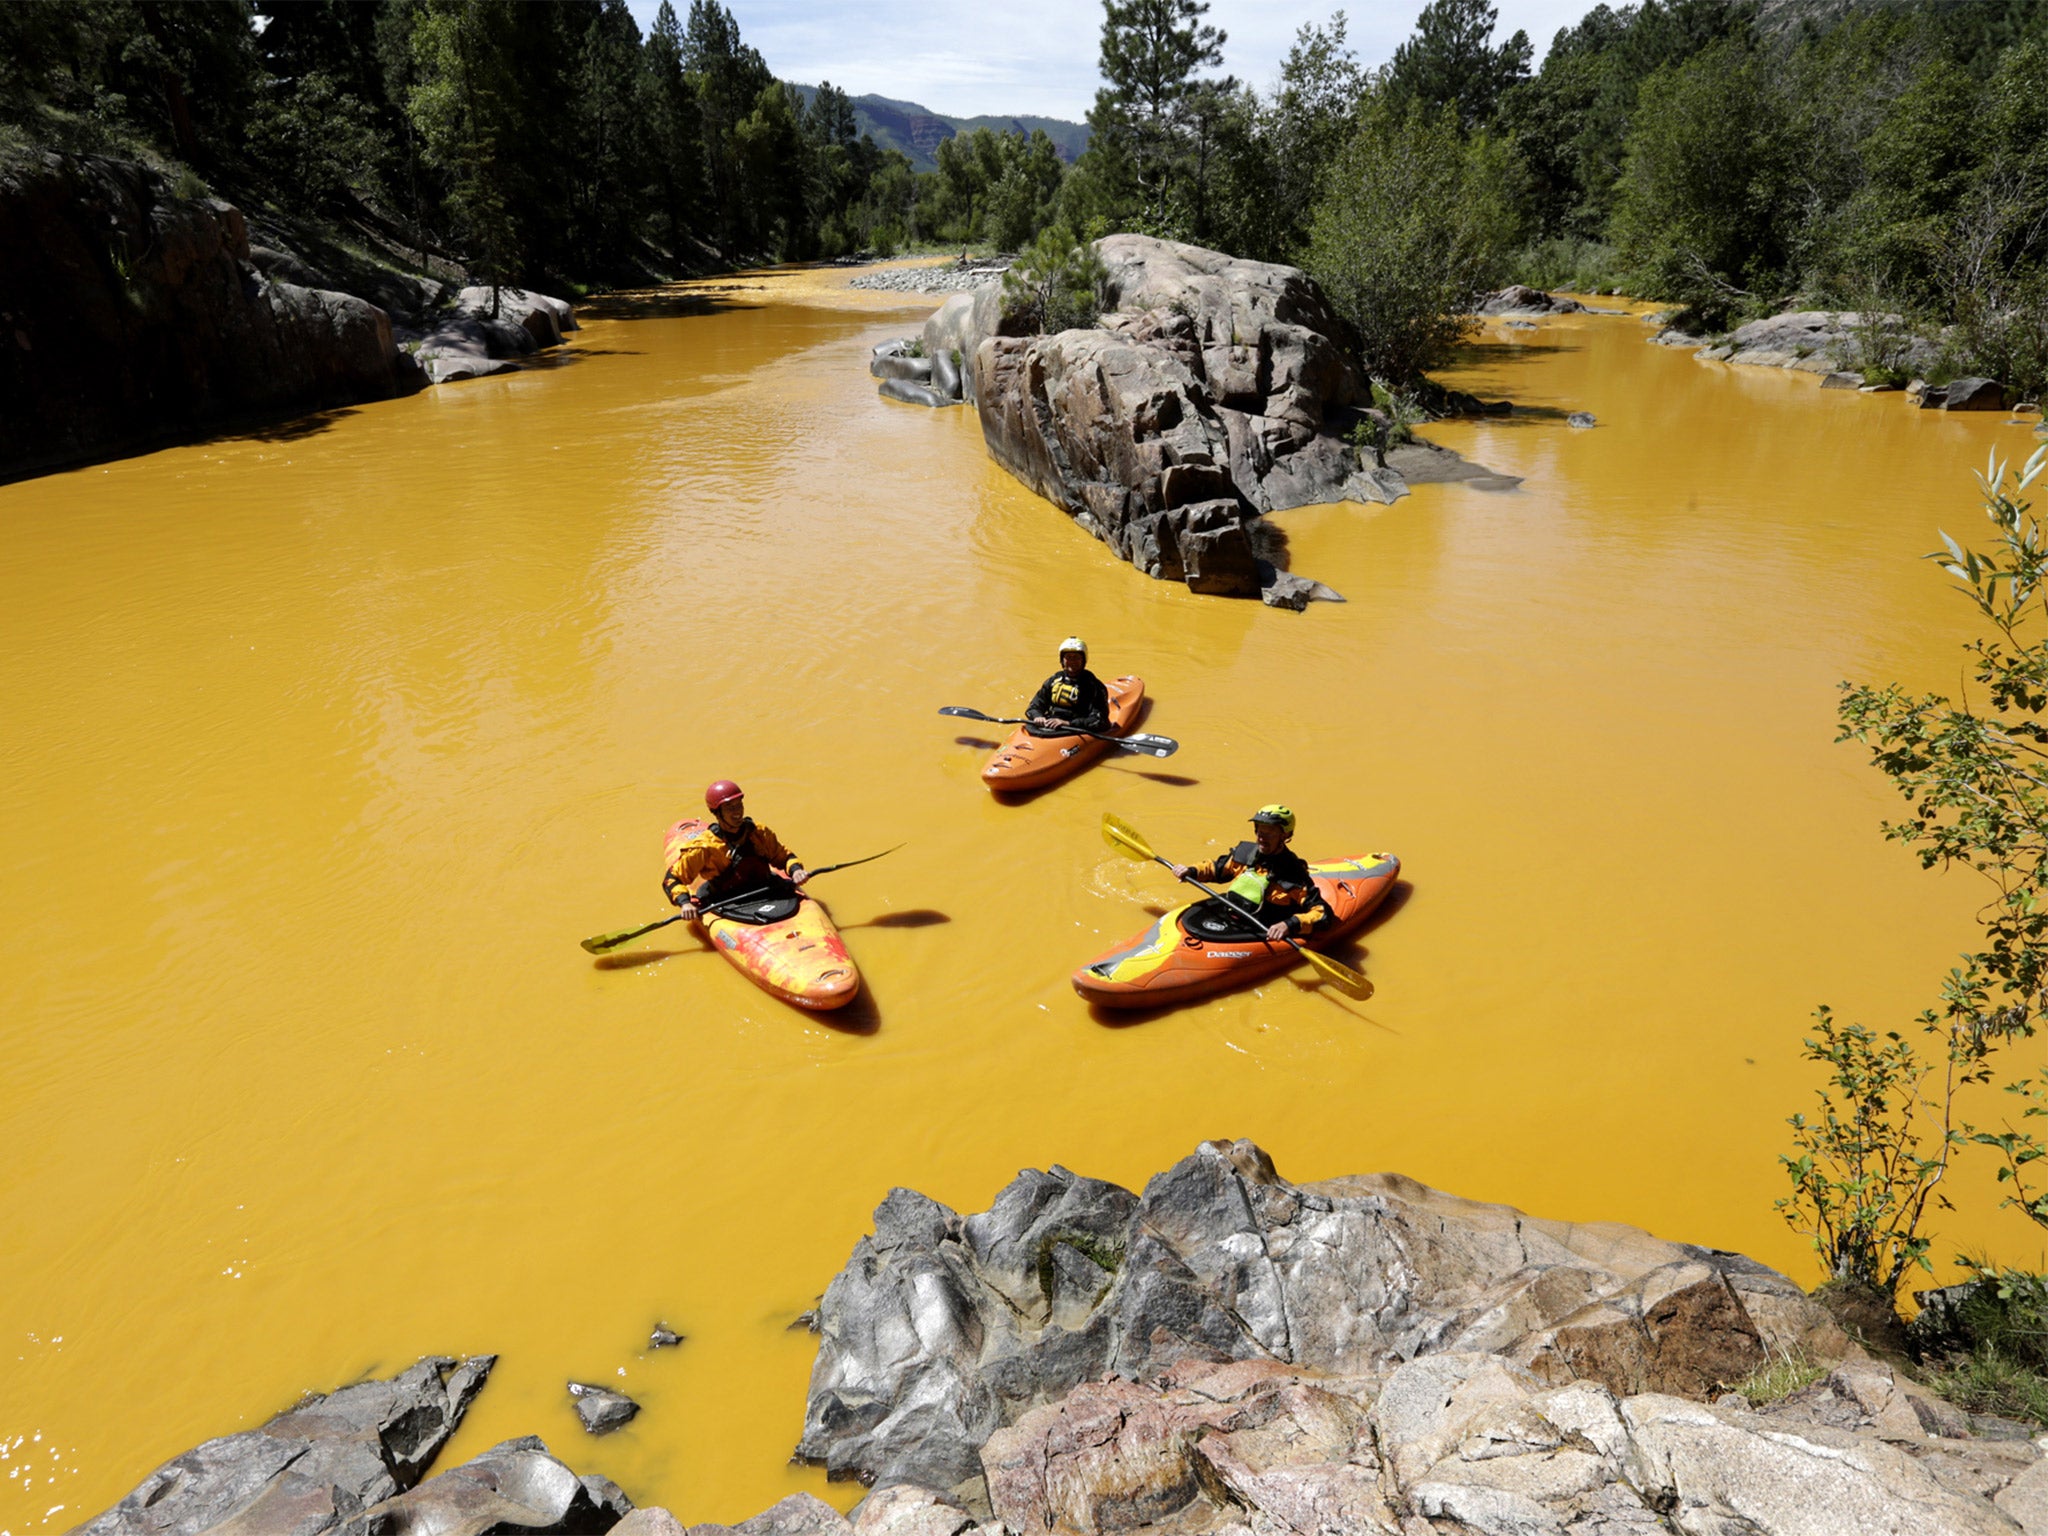 Not all toxic chemicals are as obvious as the three million gallons of contaminated water that spilled into the Animas River in Colorado last year